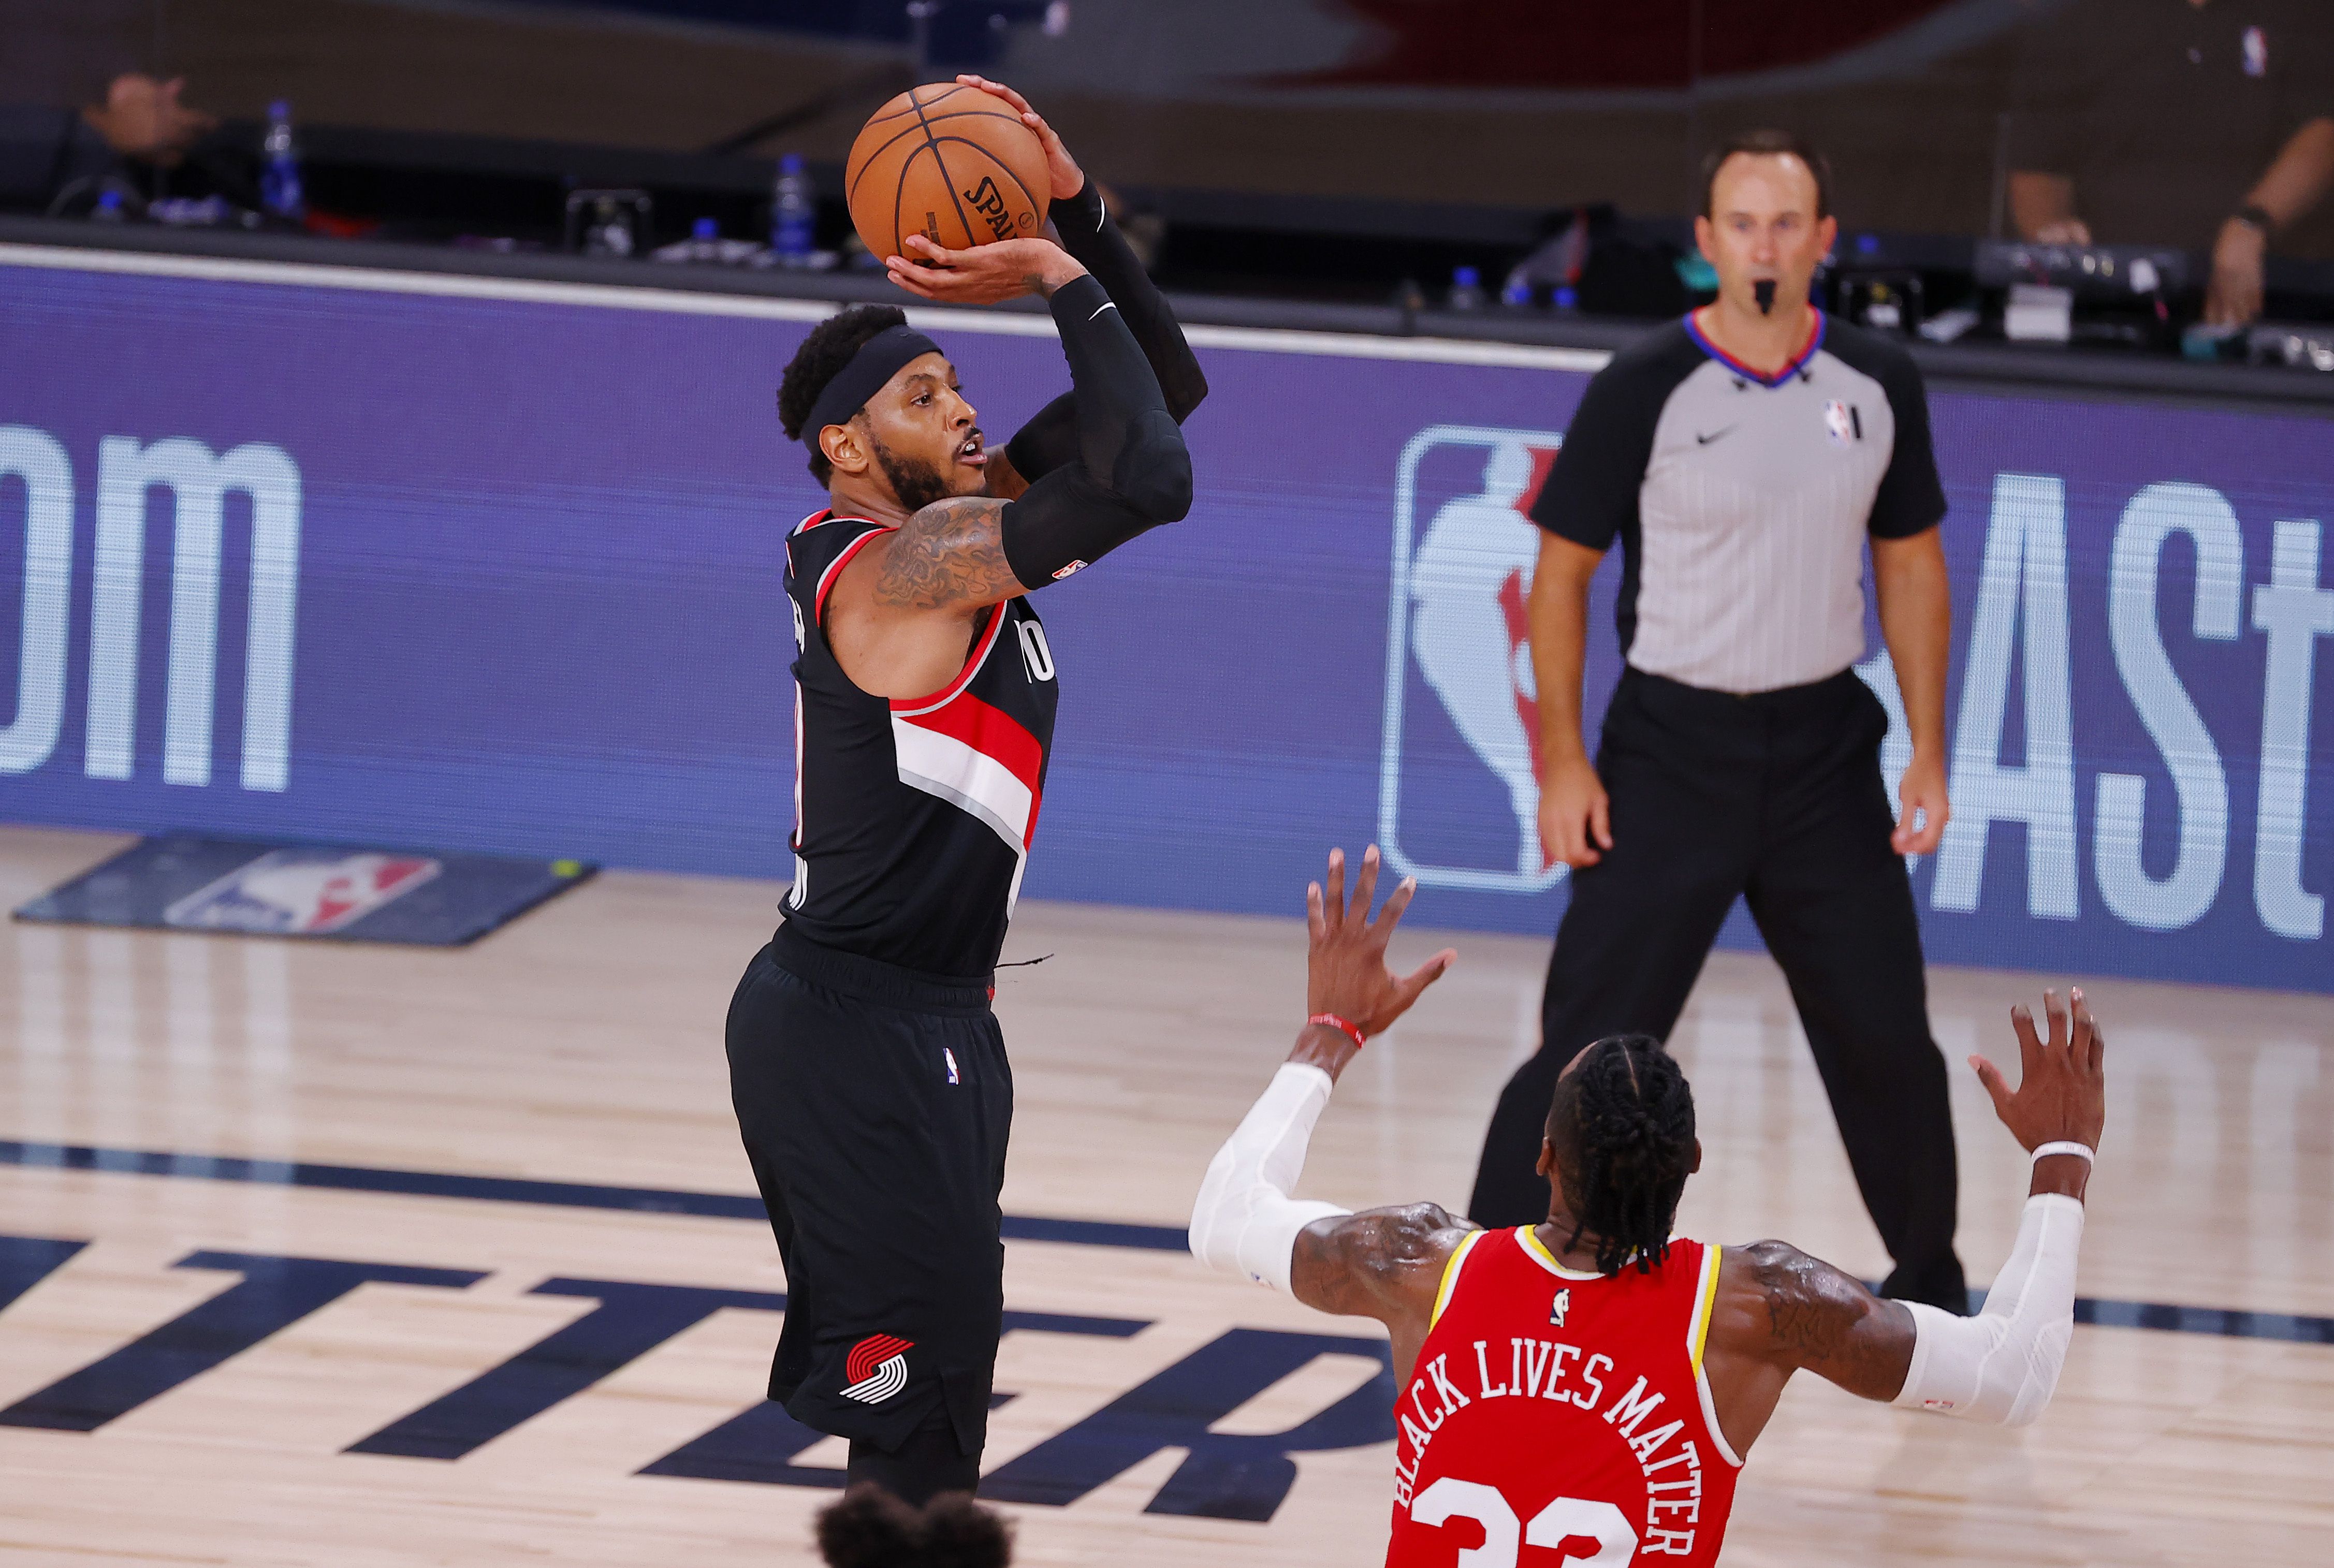 NBA - The revolutionary ball that went unnoticed during All-Star